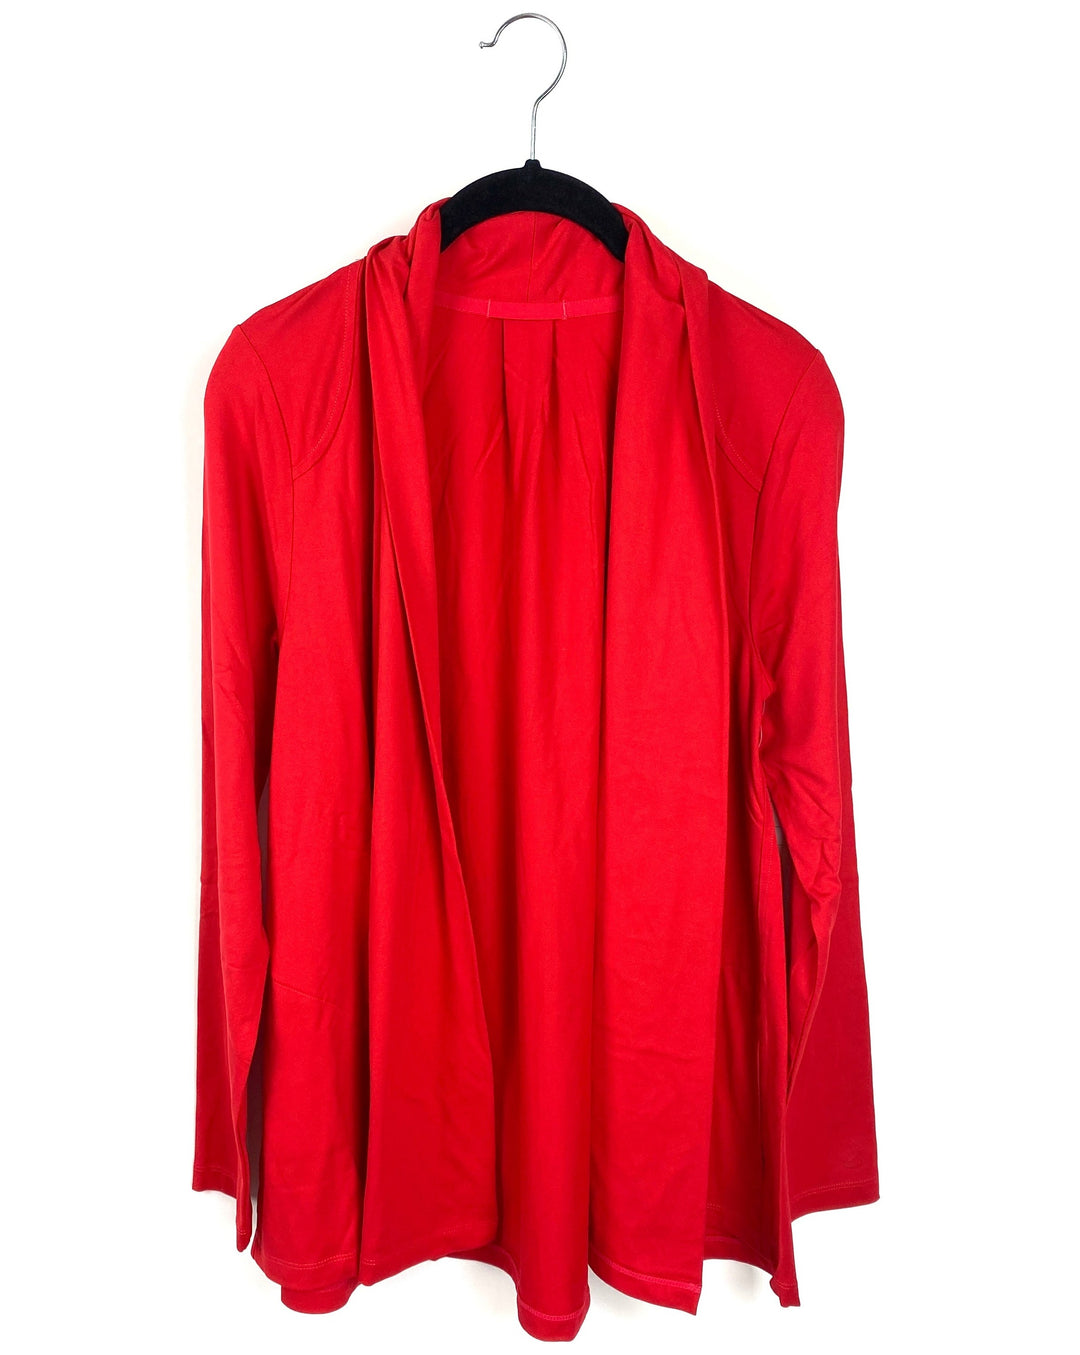 Red Long Sleeve Cardigan - Size 6-8